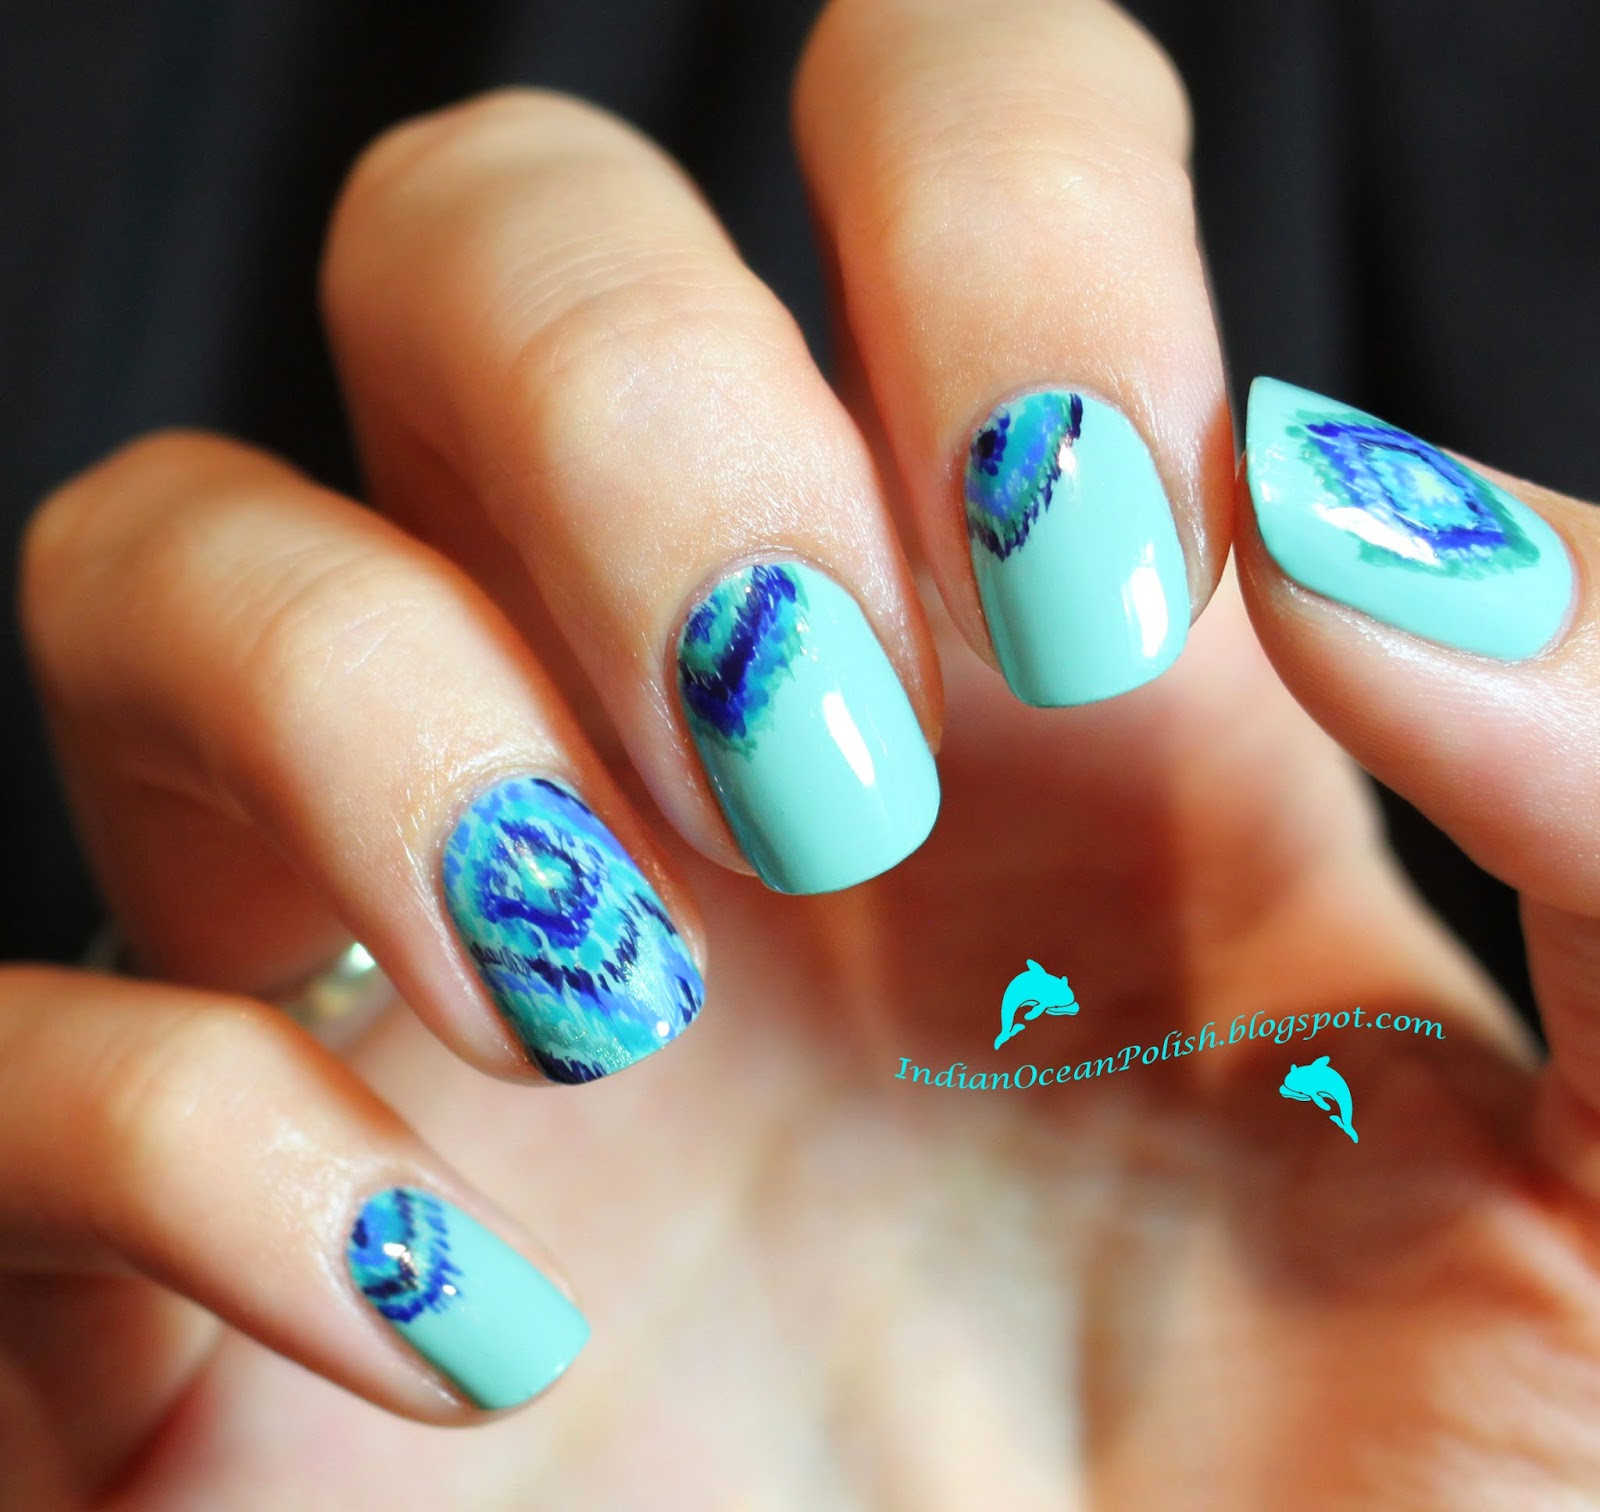 Turquoise Nail Designs
 Indian Ocean Polish Turquoise and Ocean Coloured Ikat